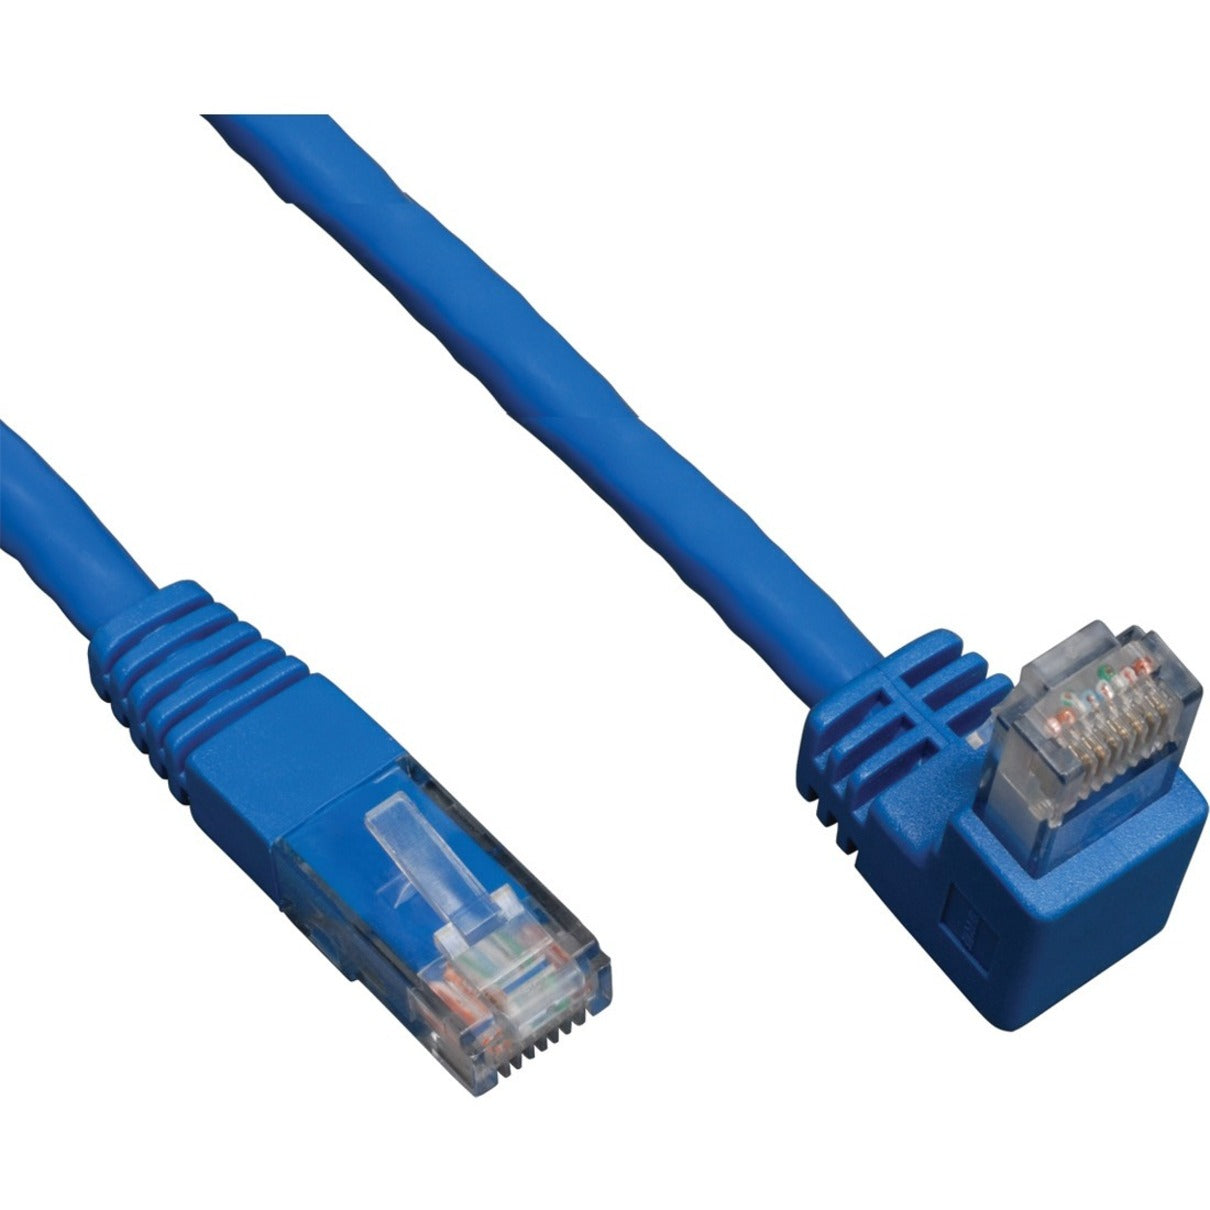 Tripp Lite N204-005-BL-DN Cat6 Patch Cable, 5 ft, Molded, Right-angled Connector, Stranded, Blue